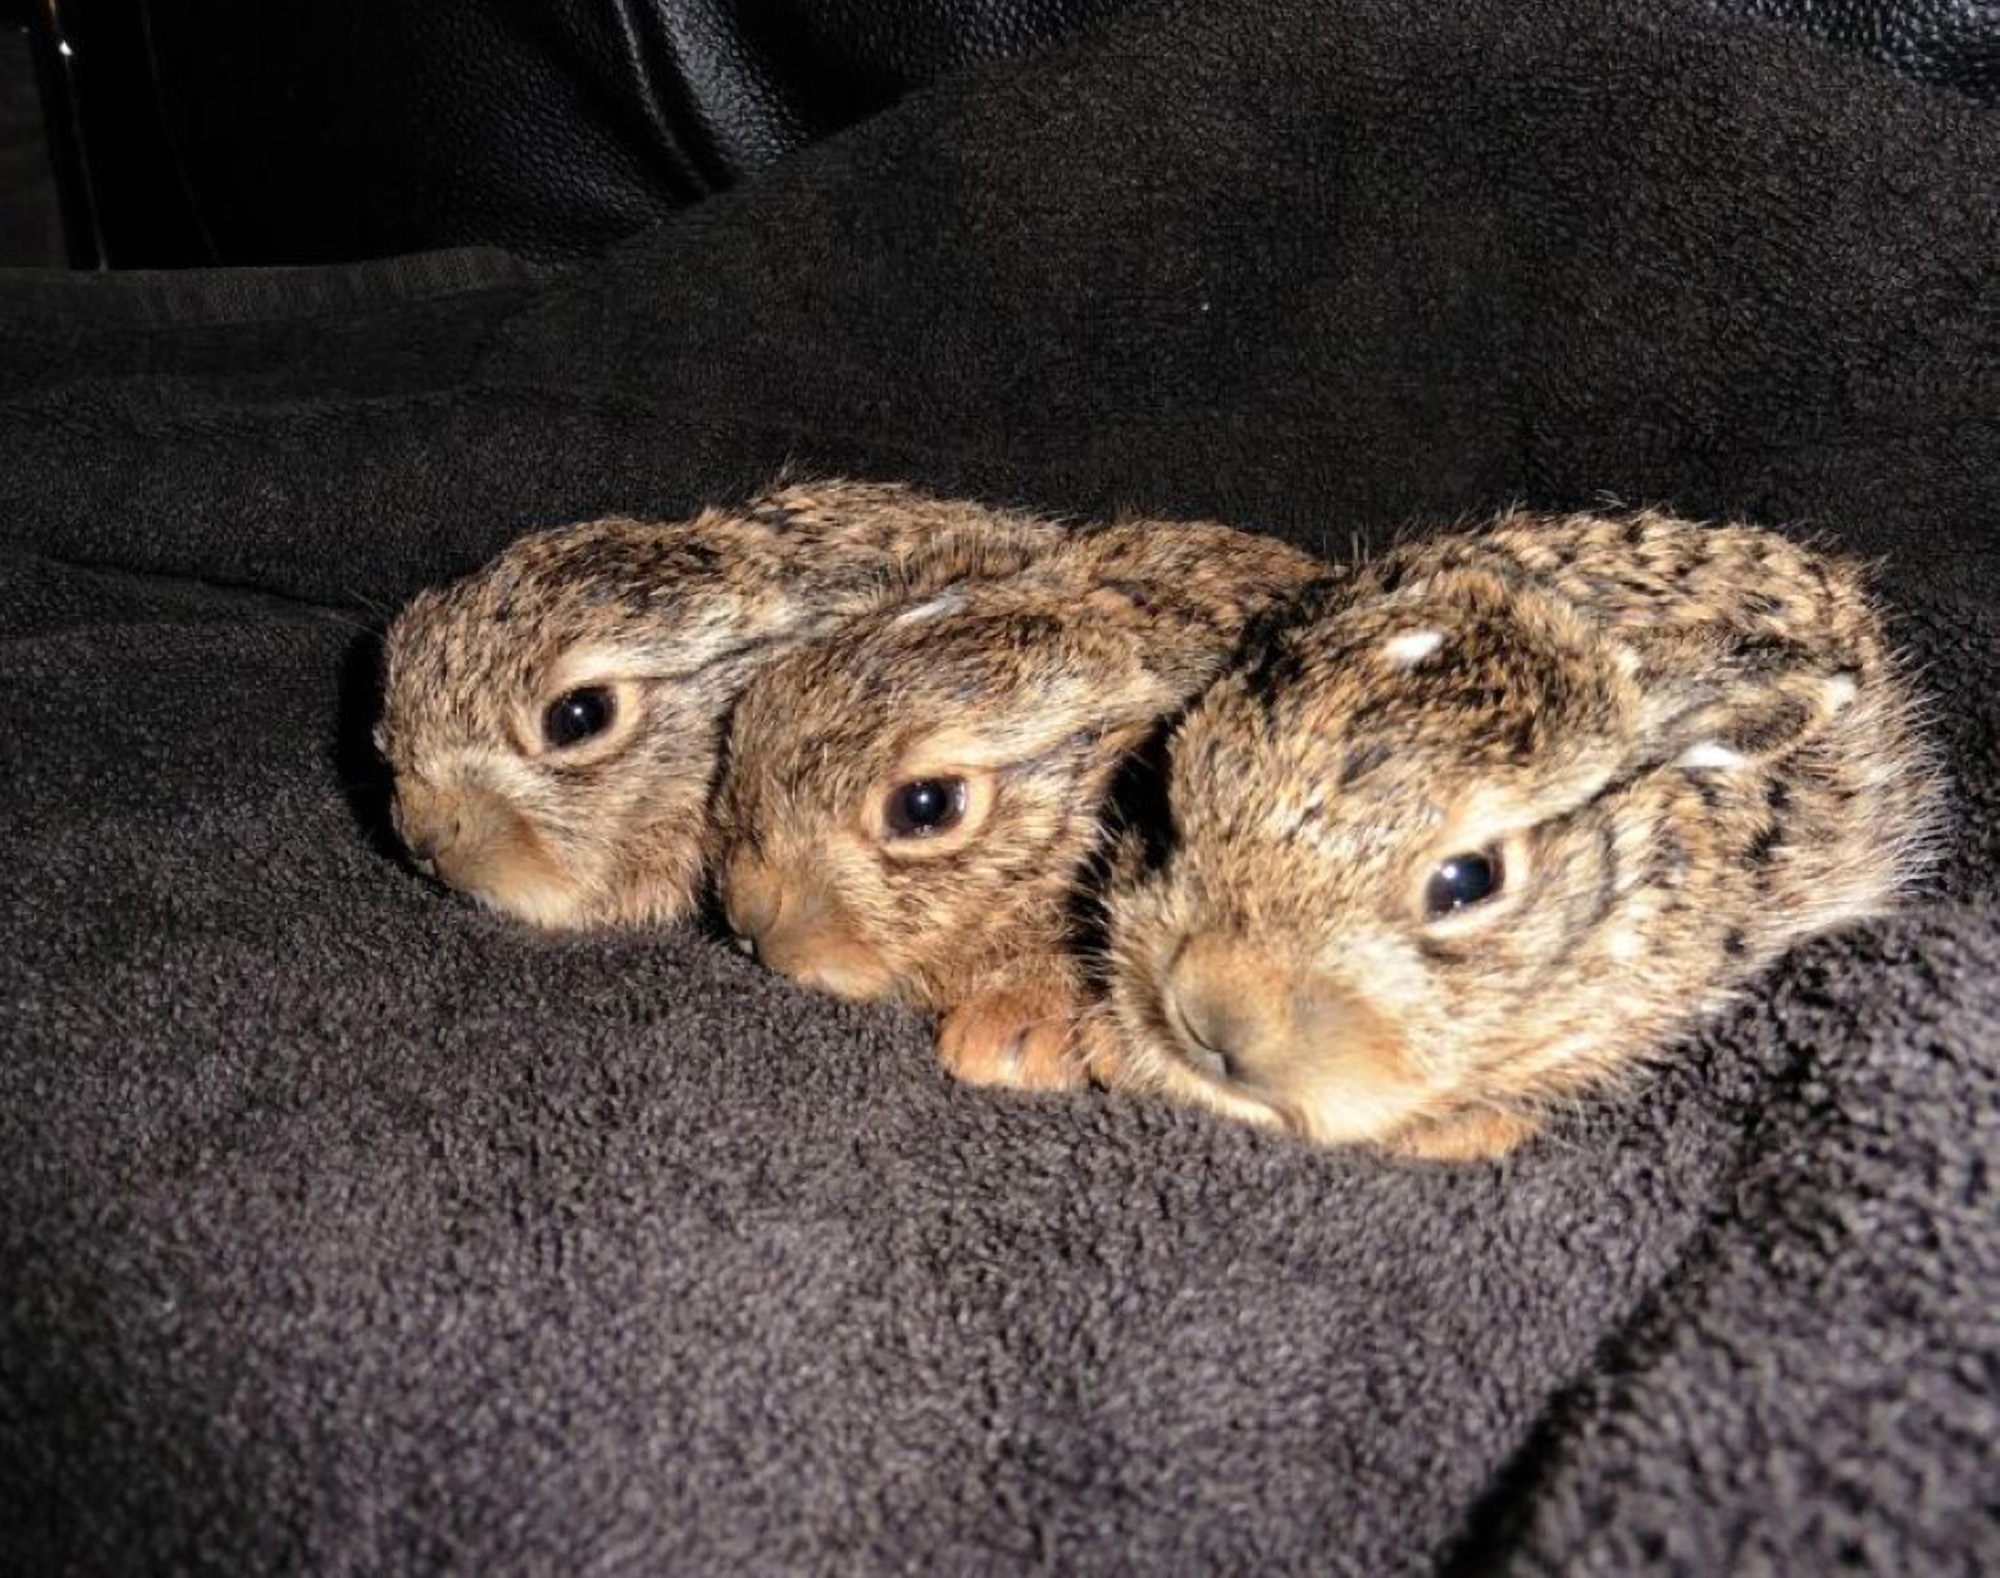 Cute Baby Hares Saved From Being Ground Up In Field - ViralTab